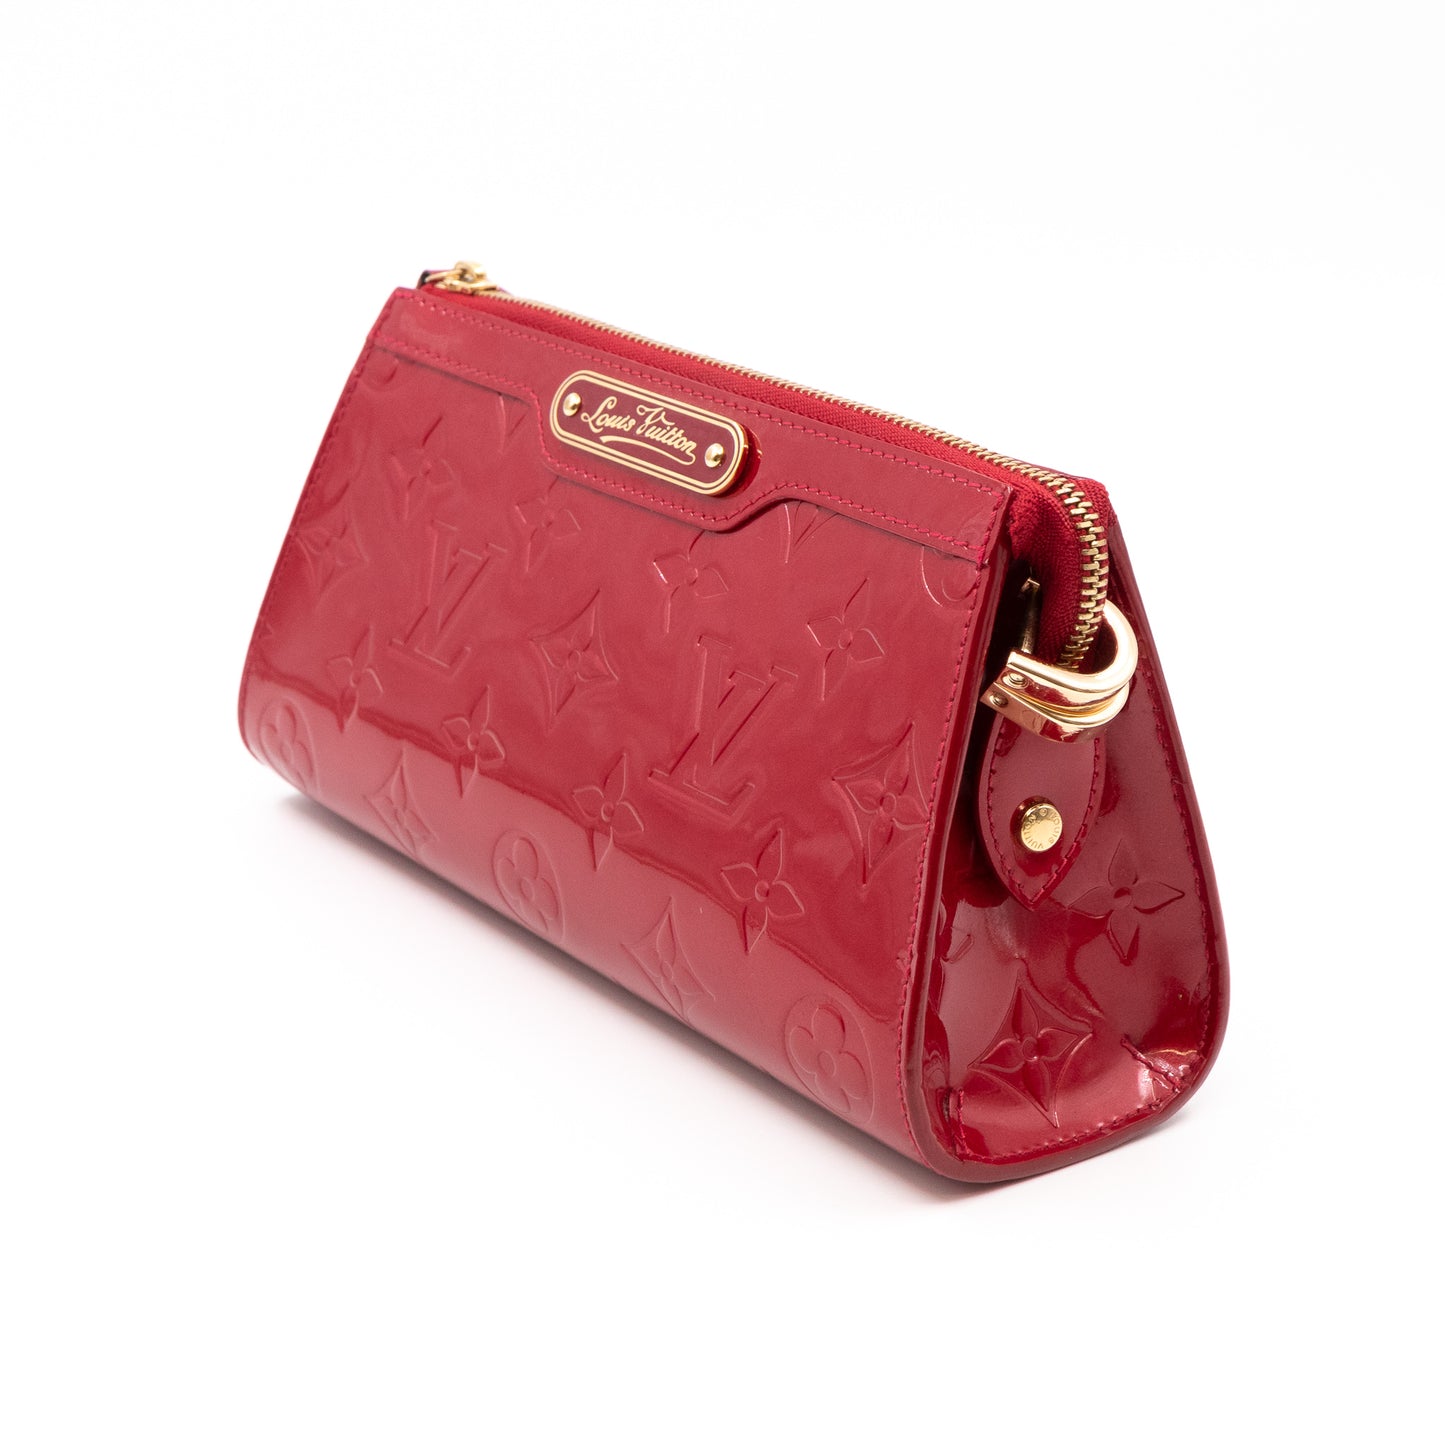 Louis Vuitton Monogram Vernis Trousse Cosmetic Pouch - Red